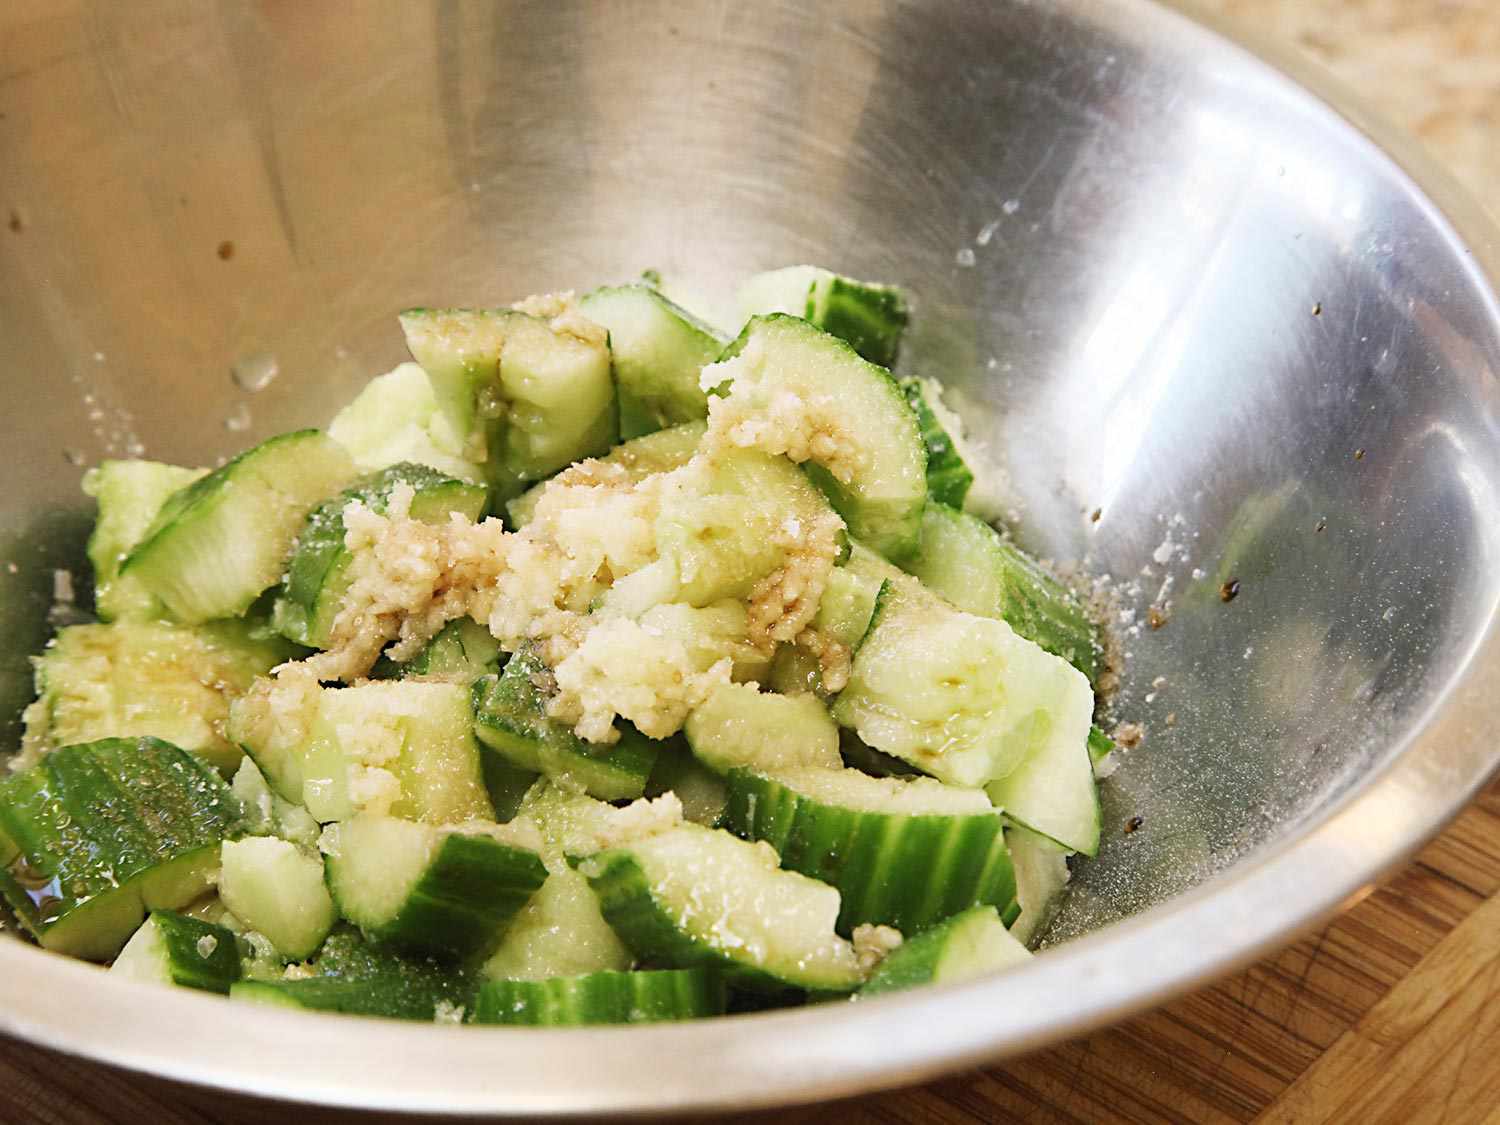 A mixing bowl containing mashed cucumber cubes, garlic, sesame oil, and vinegar.